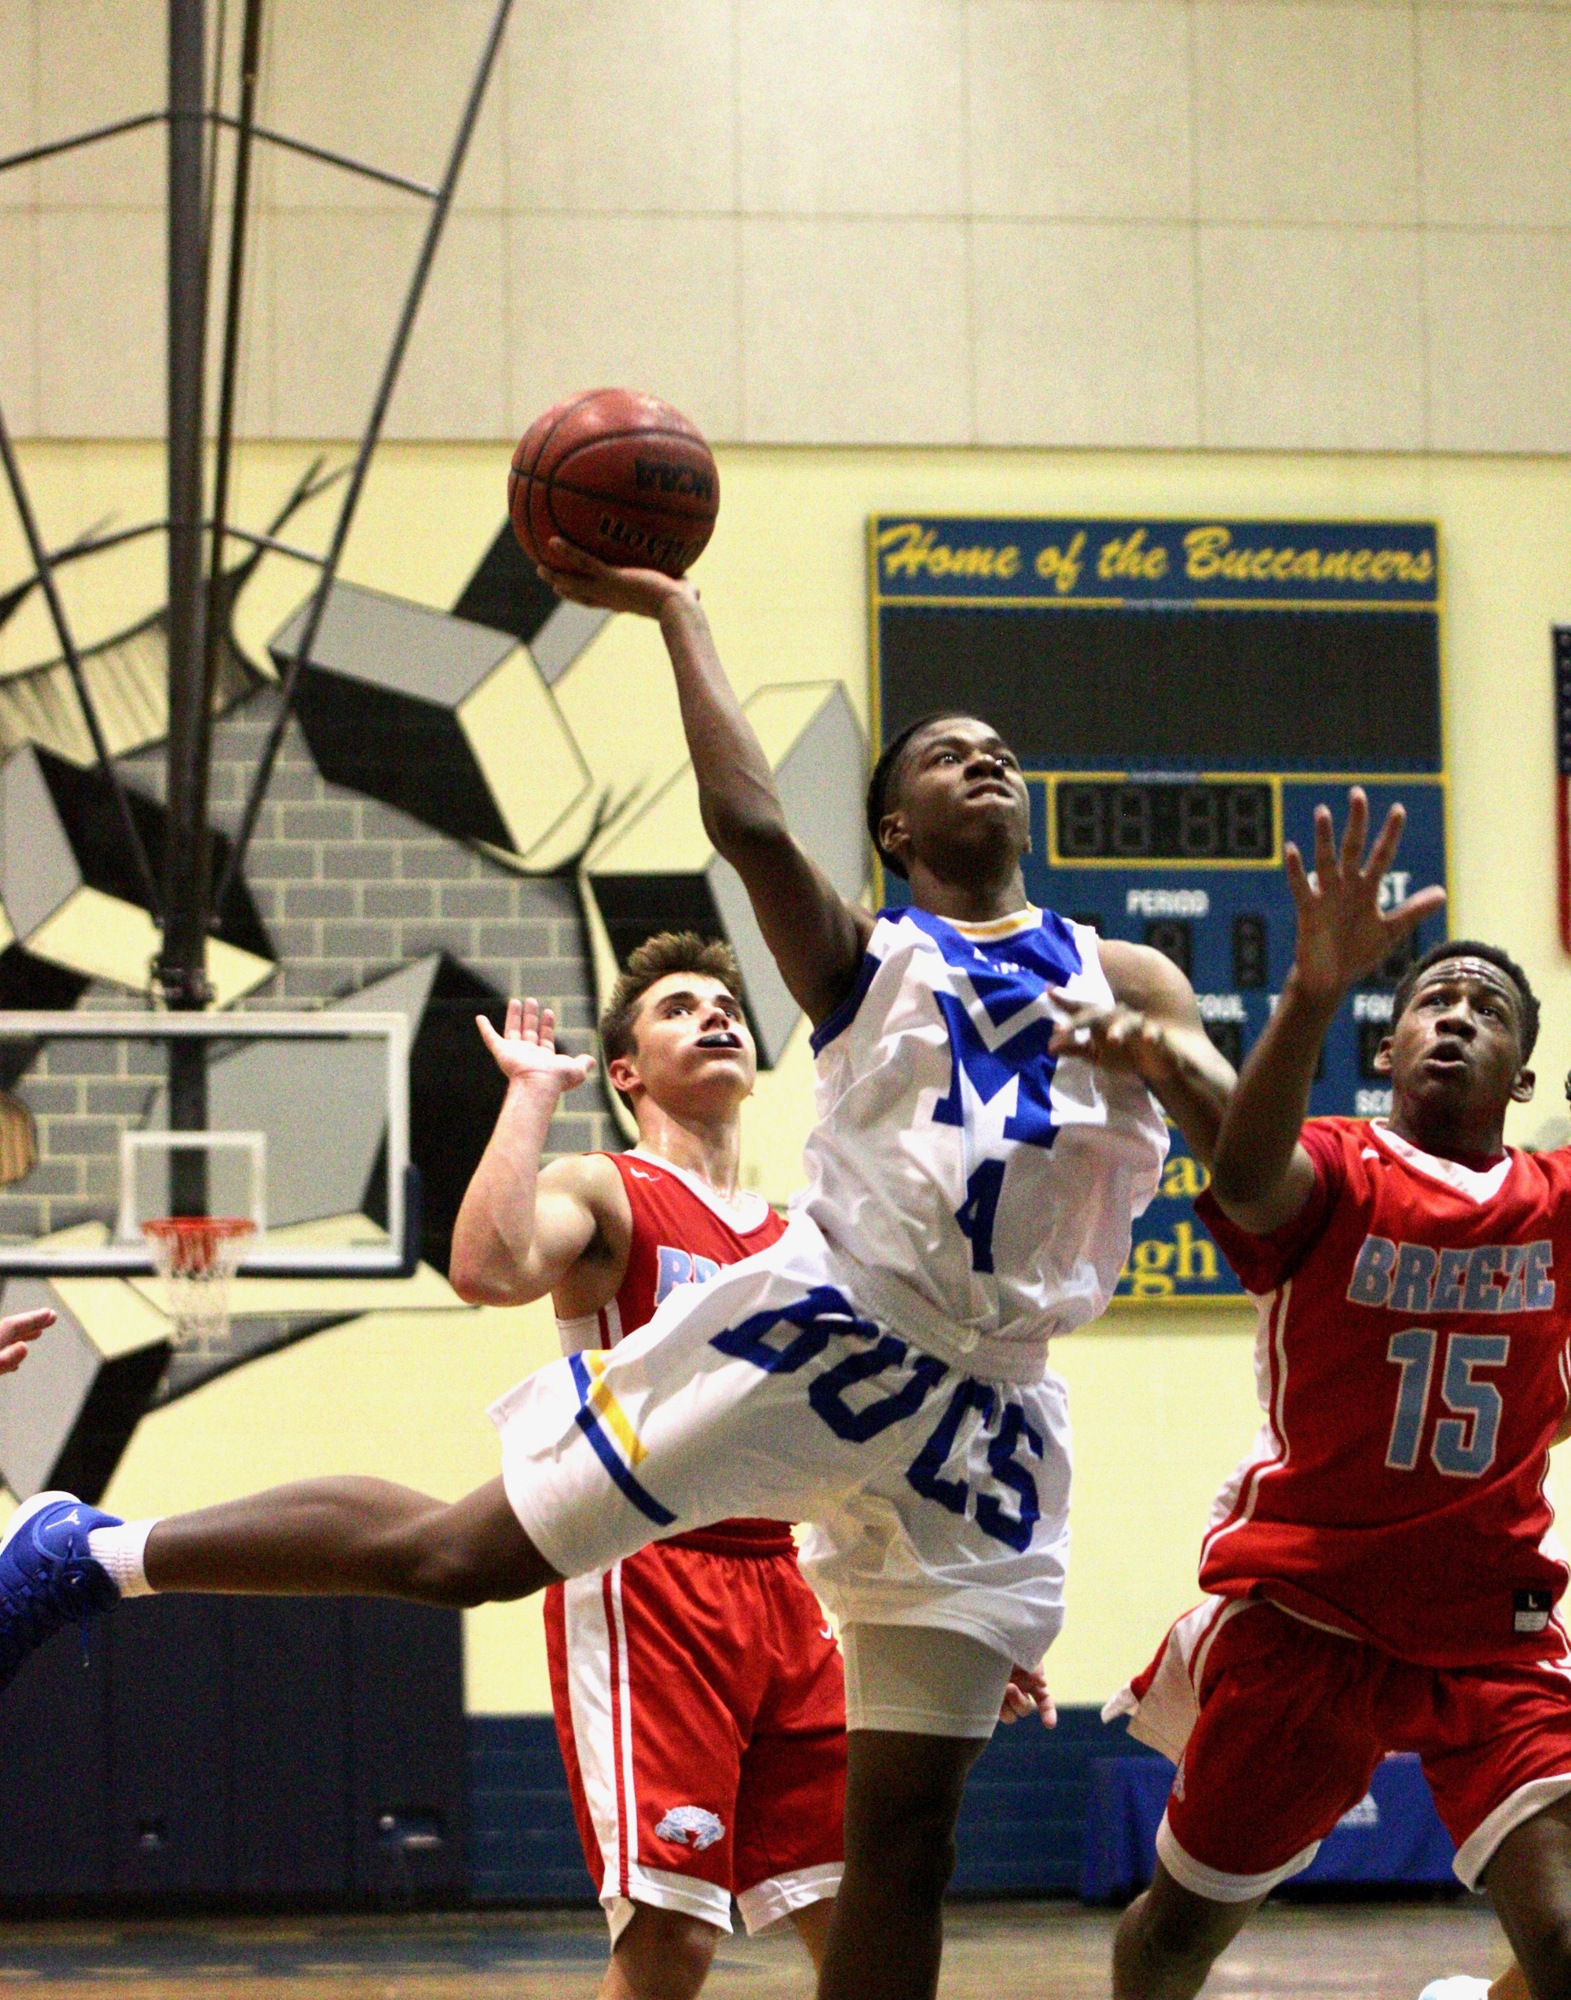 Mainland's Joe Jackson attempts a layup against Seabreeze. Photo by Ray Boone